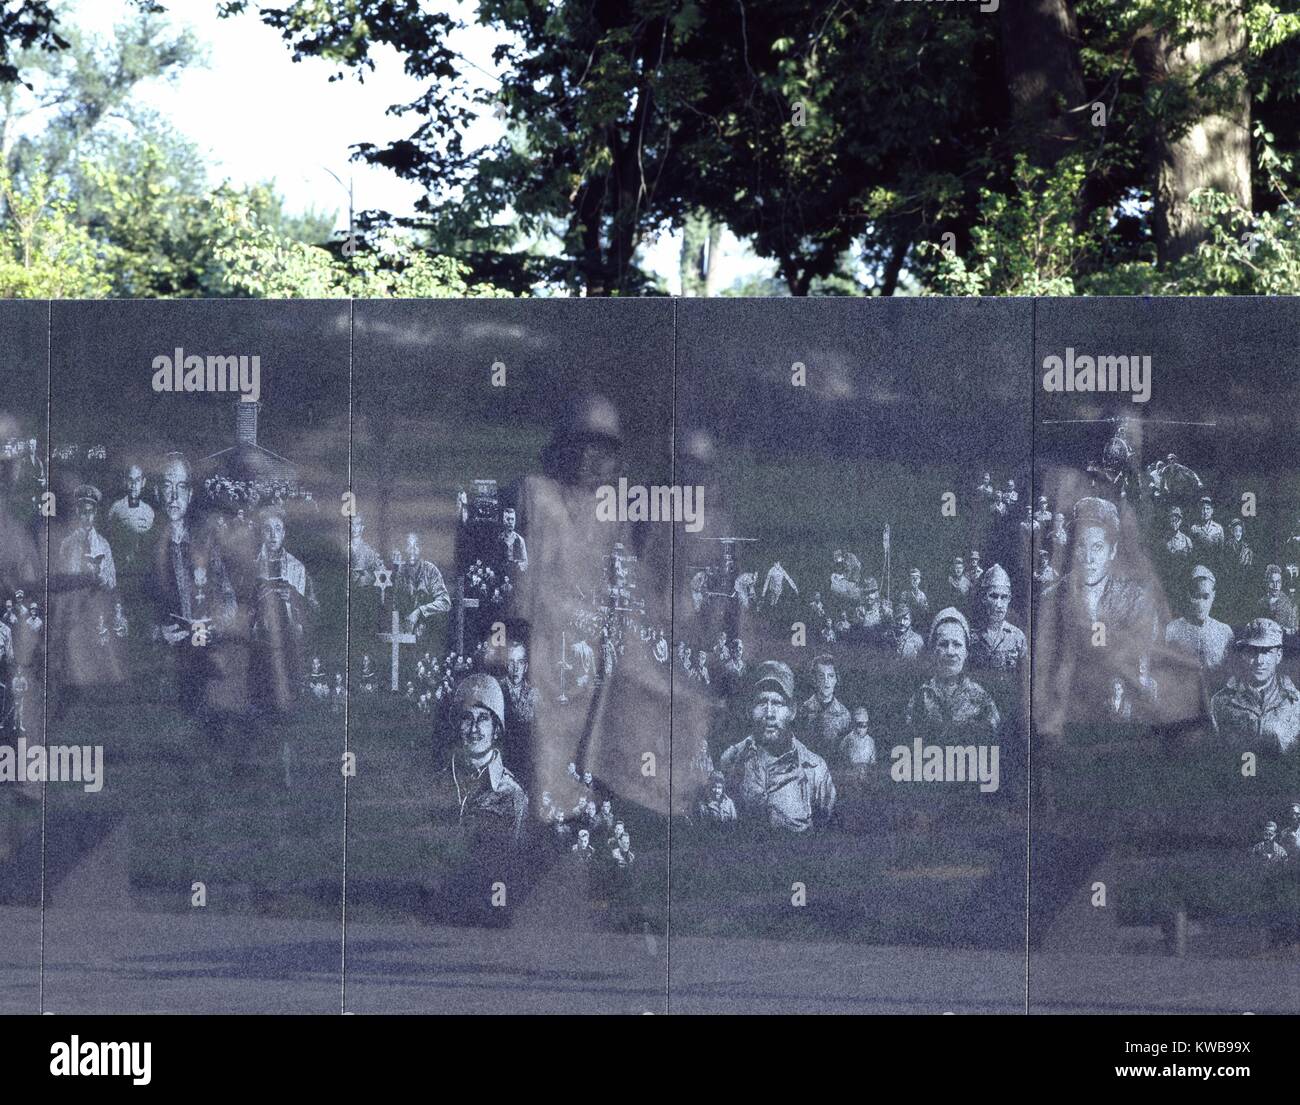 Korean War Veterans Memorial, Washington, D.C. One element of the memorial is a polished granite wall with photographic images representing the land, sea and air troops who supported those who fought in the war on land. Sculptures of 'soldiers on patrol' are reflected in the wall. It was dedicated on July 27, 1995. (BSLOC 2014 11 277) Stock Photo